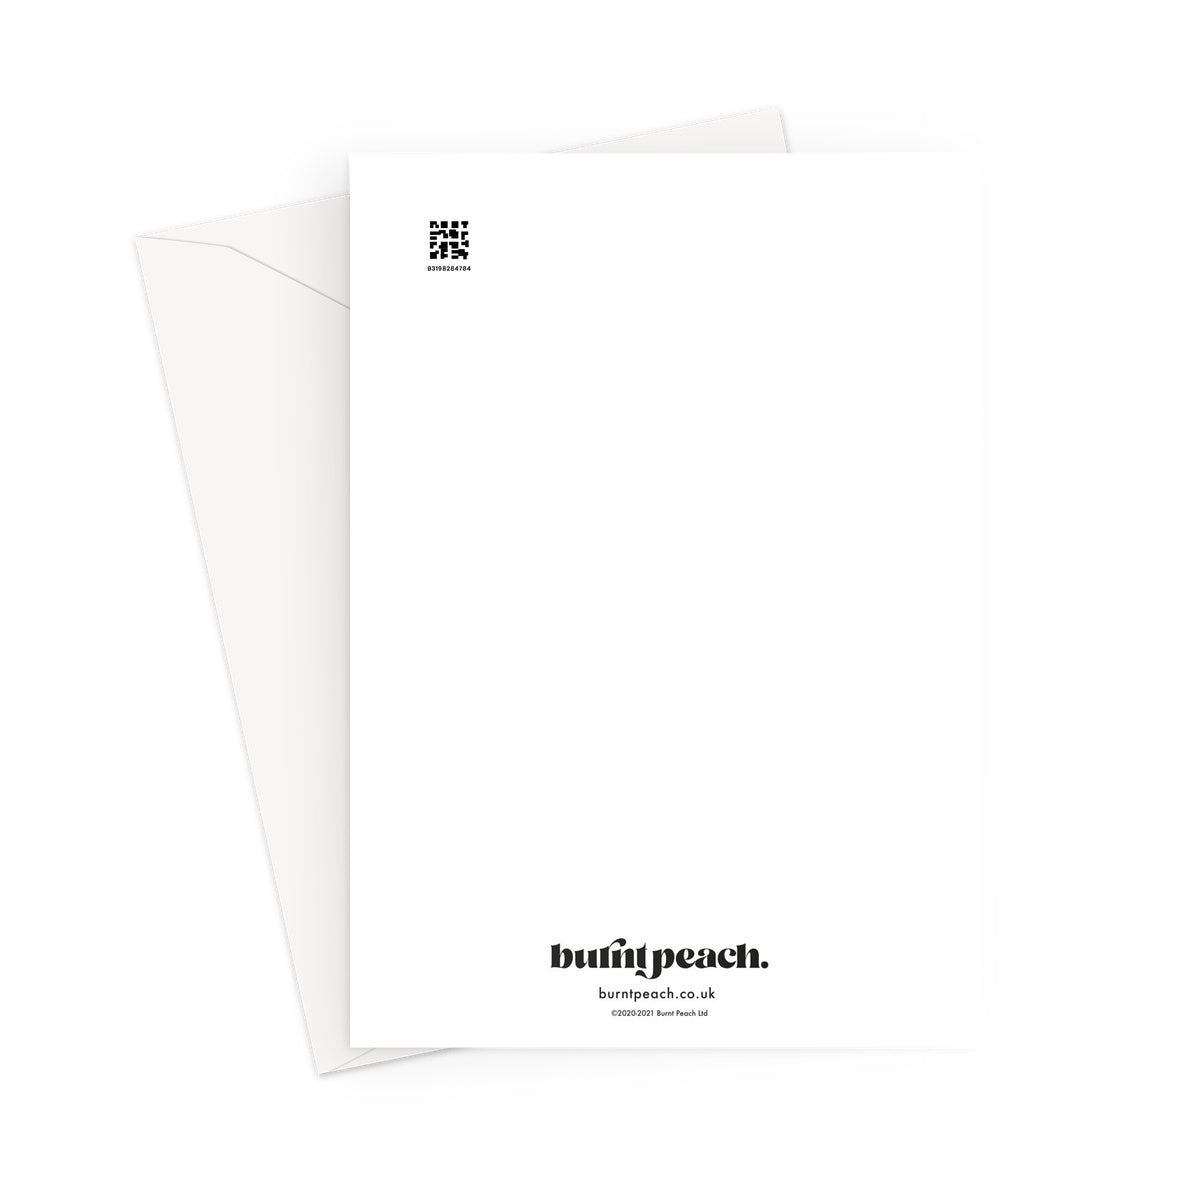 BE BRILLIANT AND DO LOADS - Black/White Greeting Card